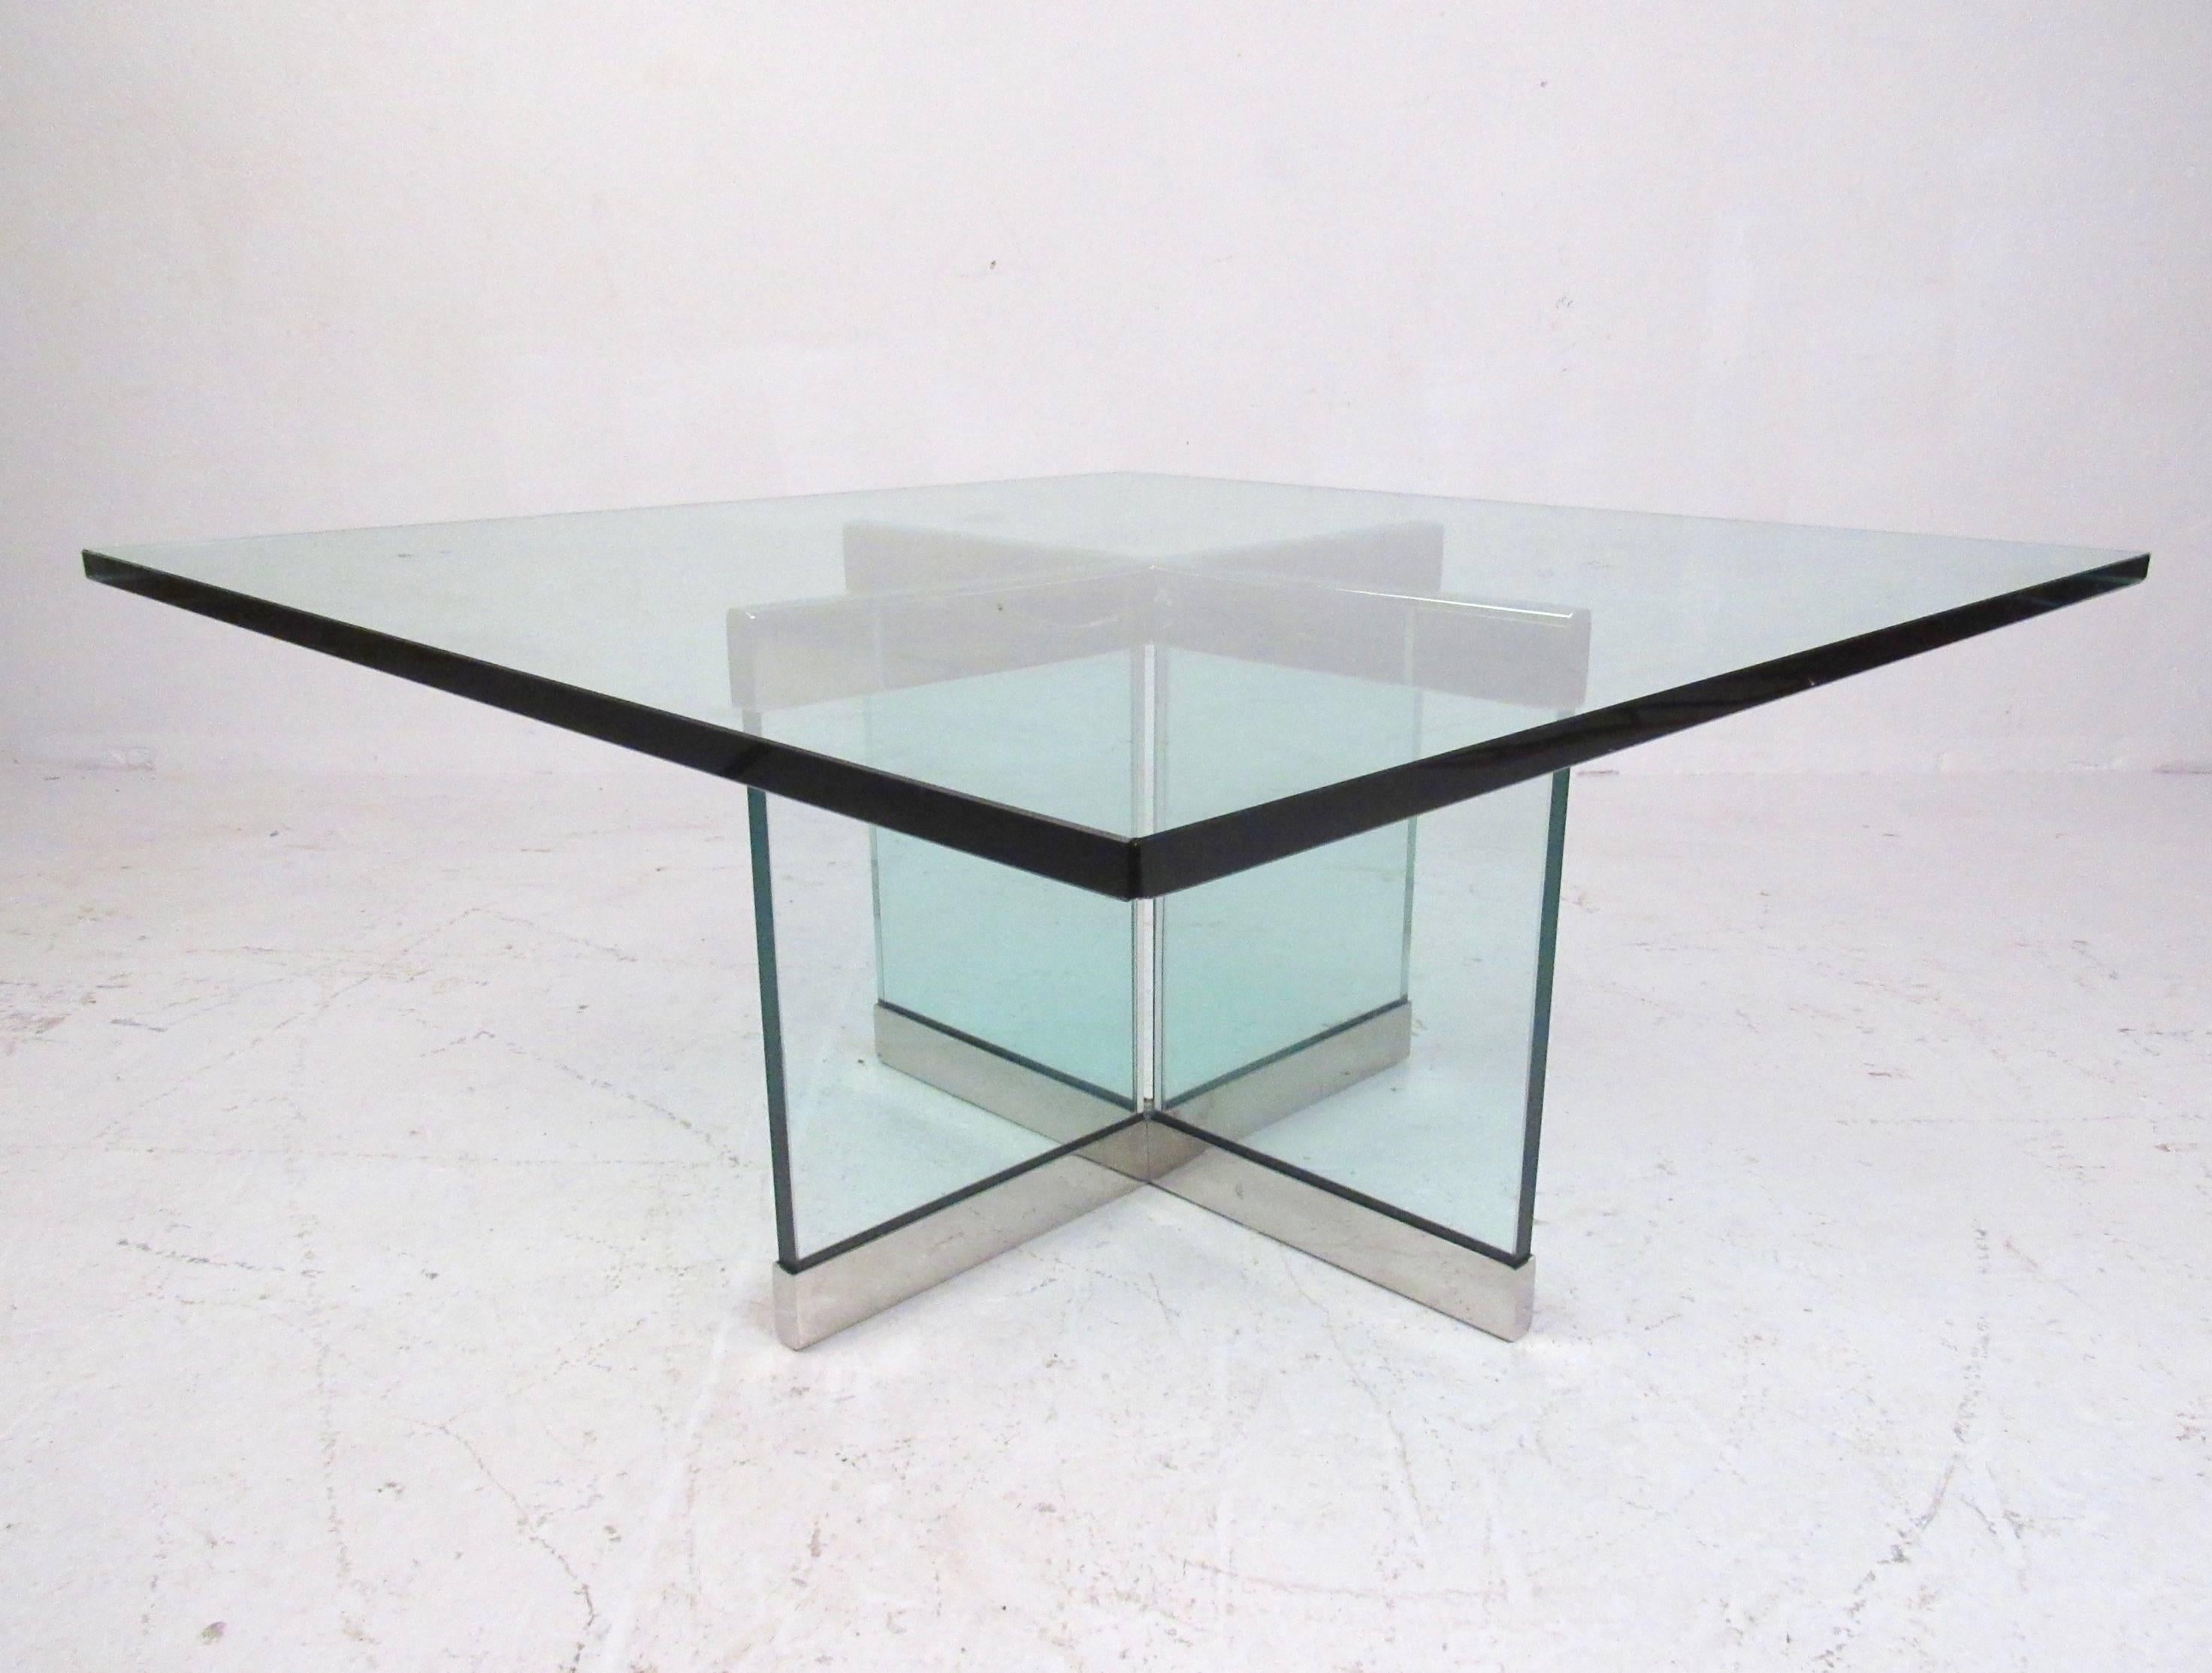 This unique modern coffee table by Leon Rosen for Pace furniture features stylish steel chrome and bevelled glass coffee table base with a 3/4 inch glass top. Impressive Mid-Century Modern cocktail table makes a substantial addition to home or